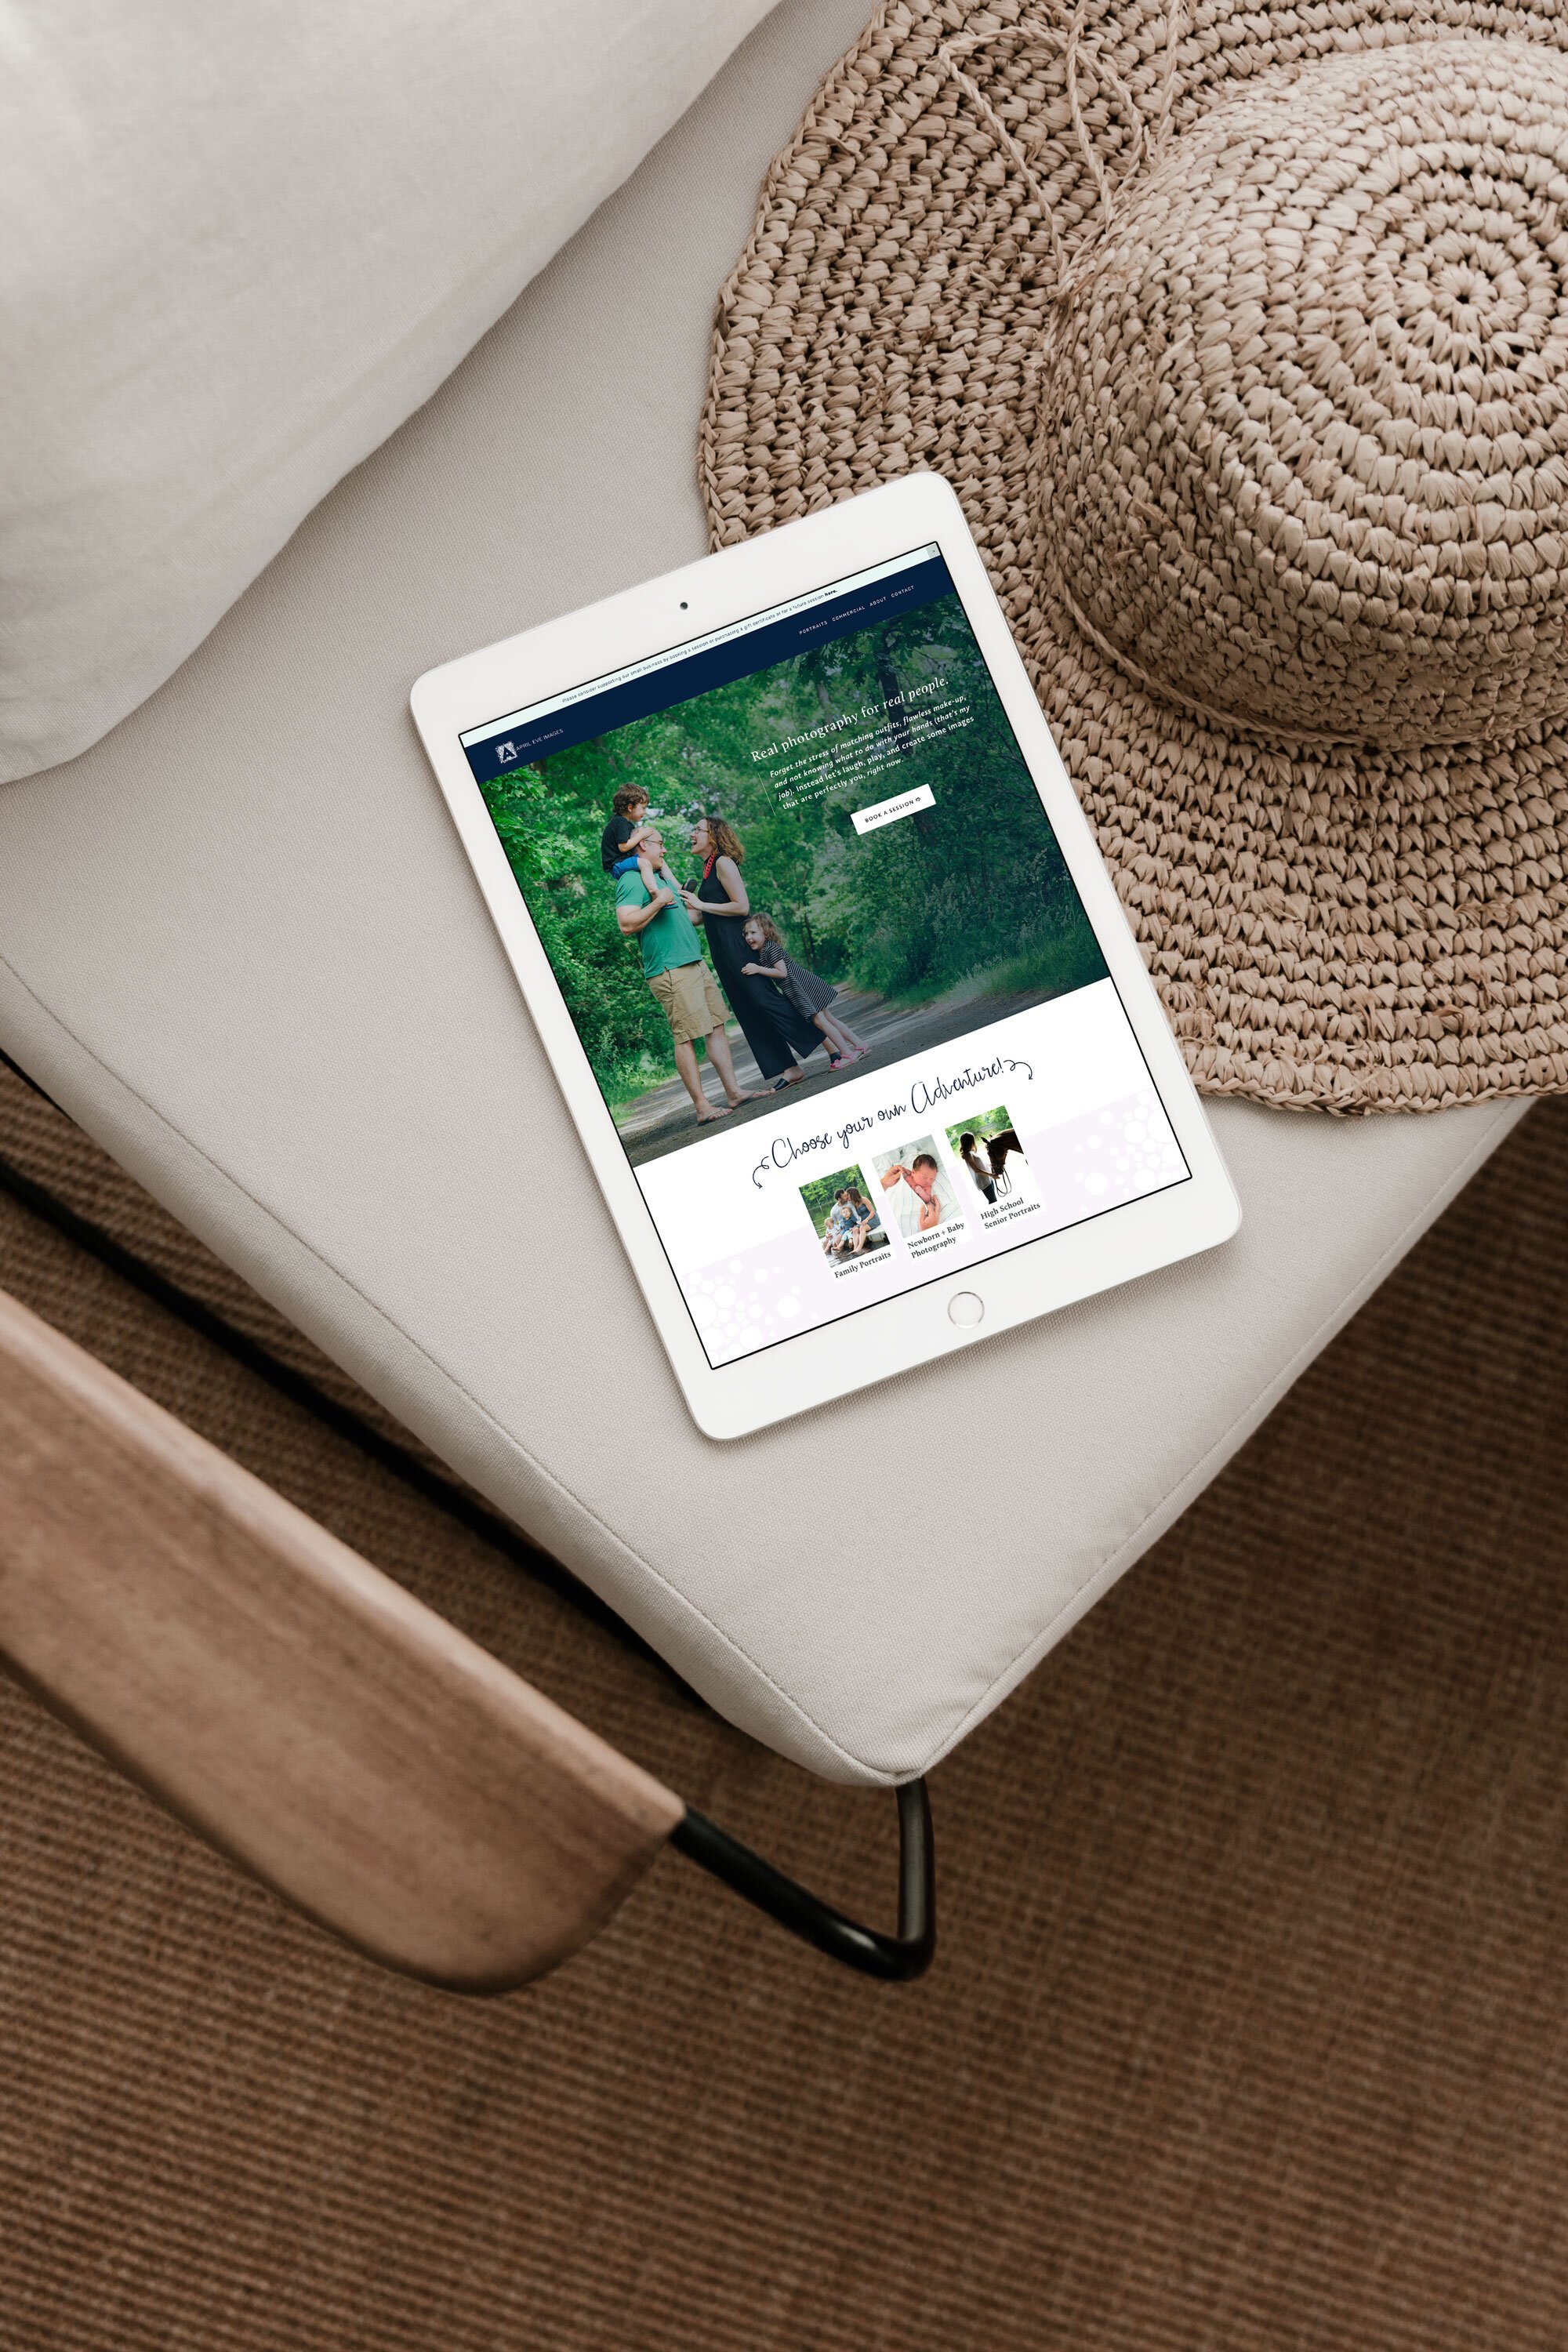  custom website design for the business of a local portrait photographer based in Massachusetts. The website shows a portrait of a happy family in a forest and a section beneath outlining services. The website design is displayed on an iPad. The iPad